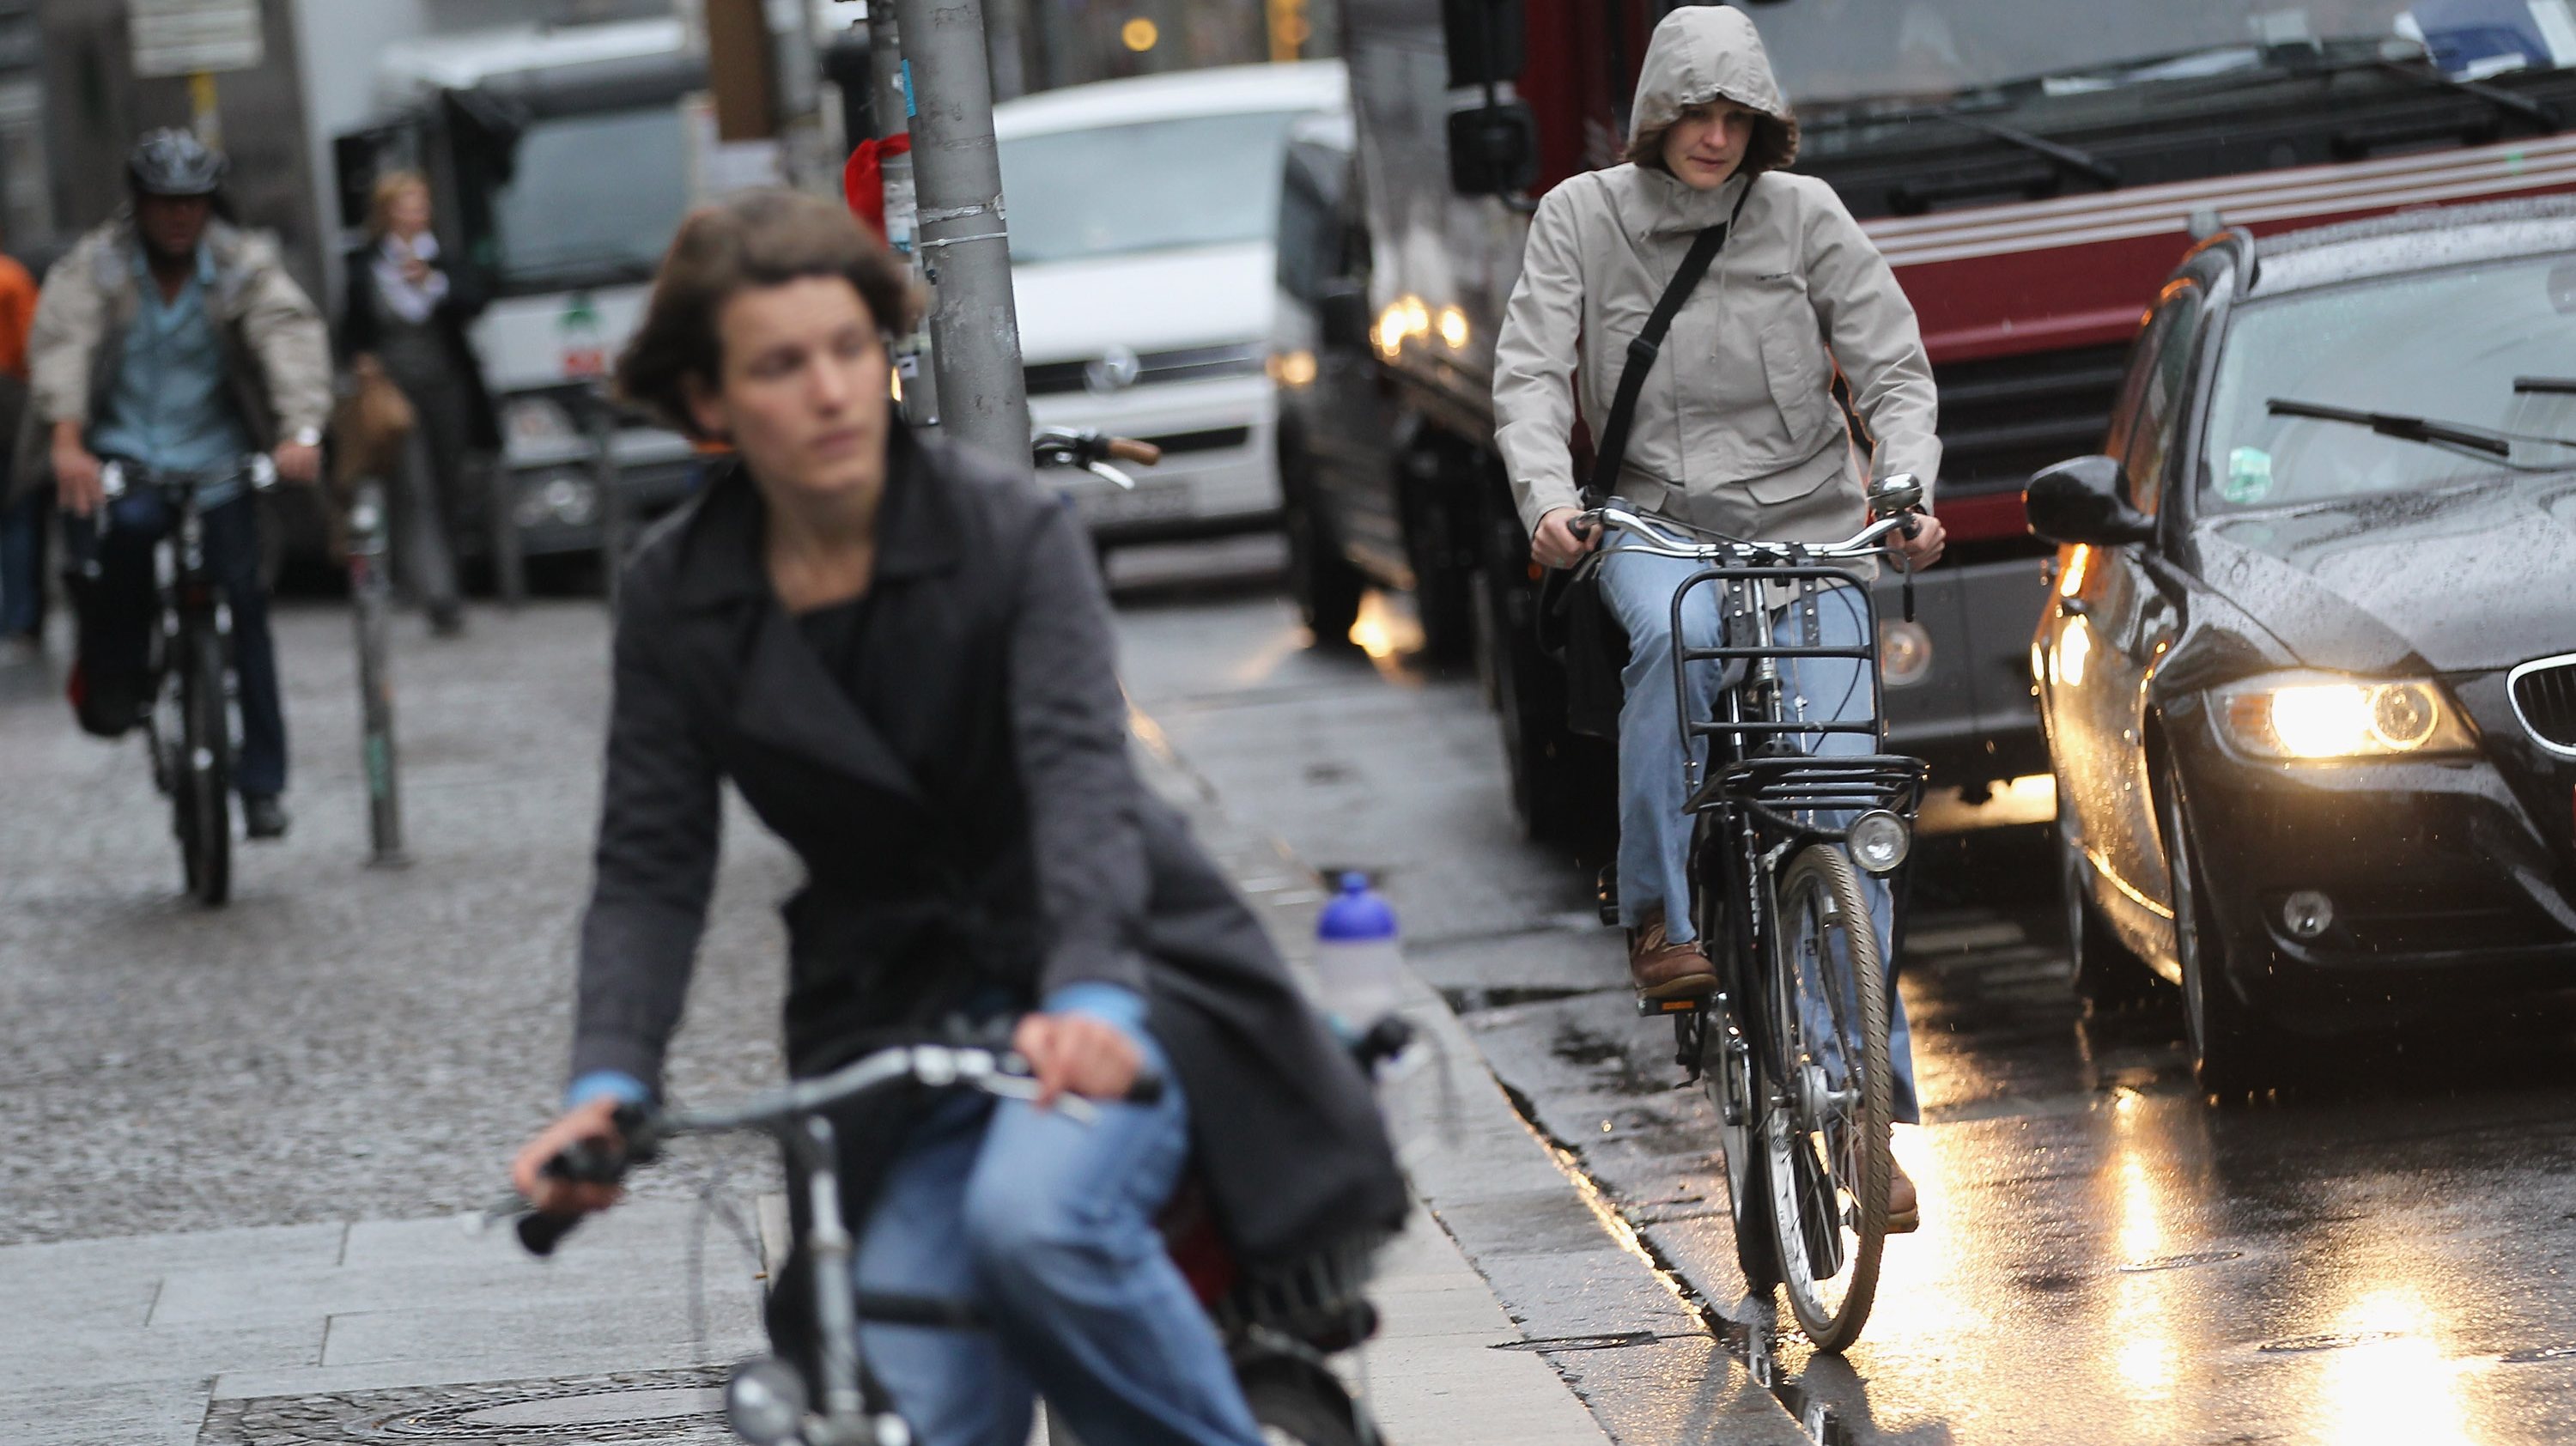 Motorists And Cyclists Co-Exist In Urban Traffic